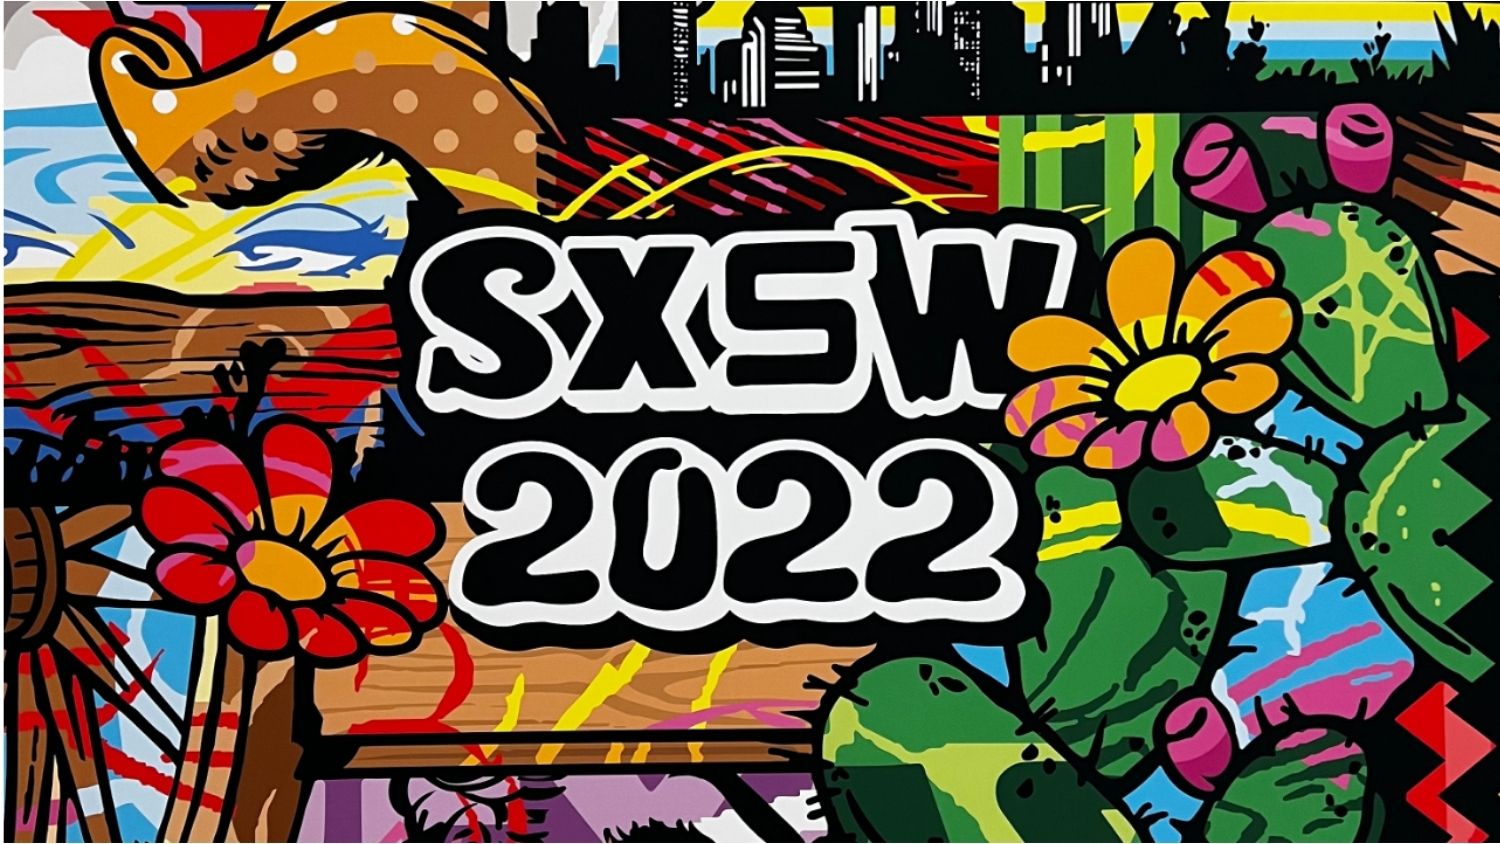 SXSW 2022: Insights for Brands